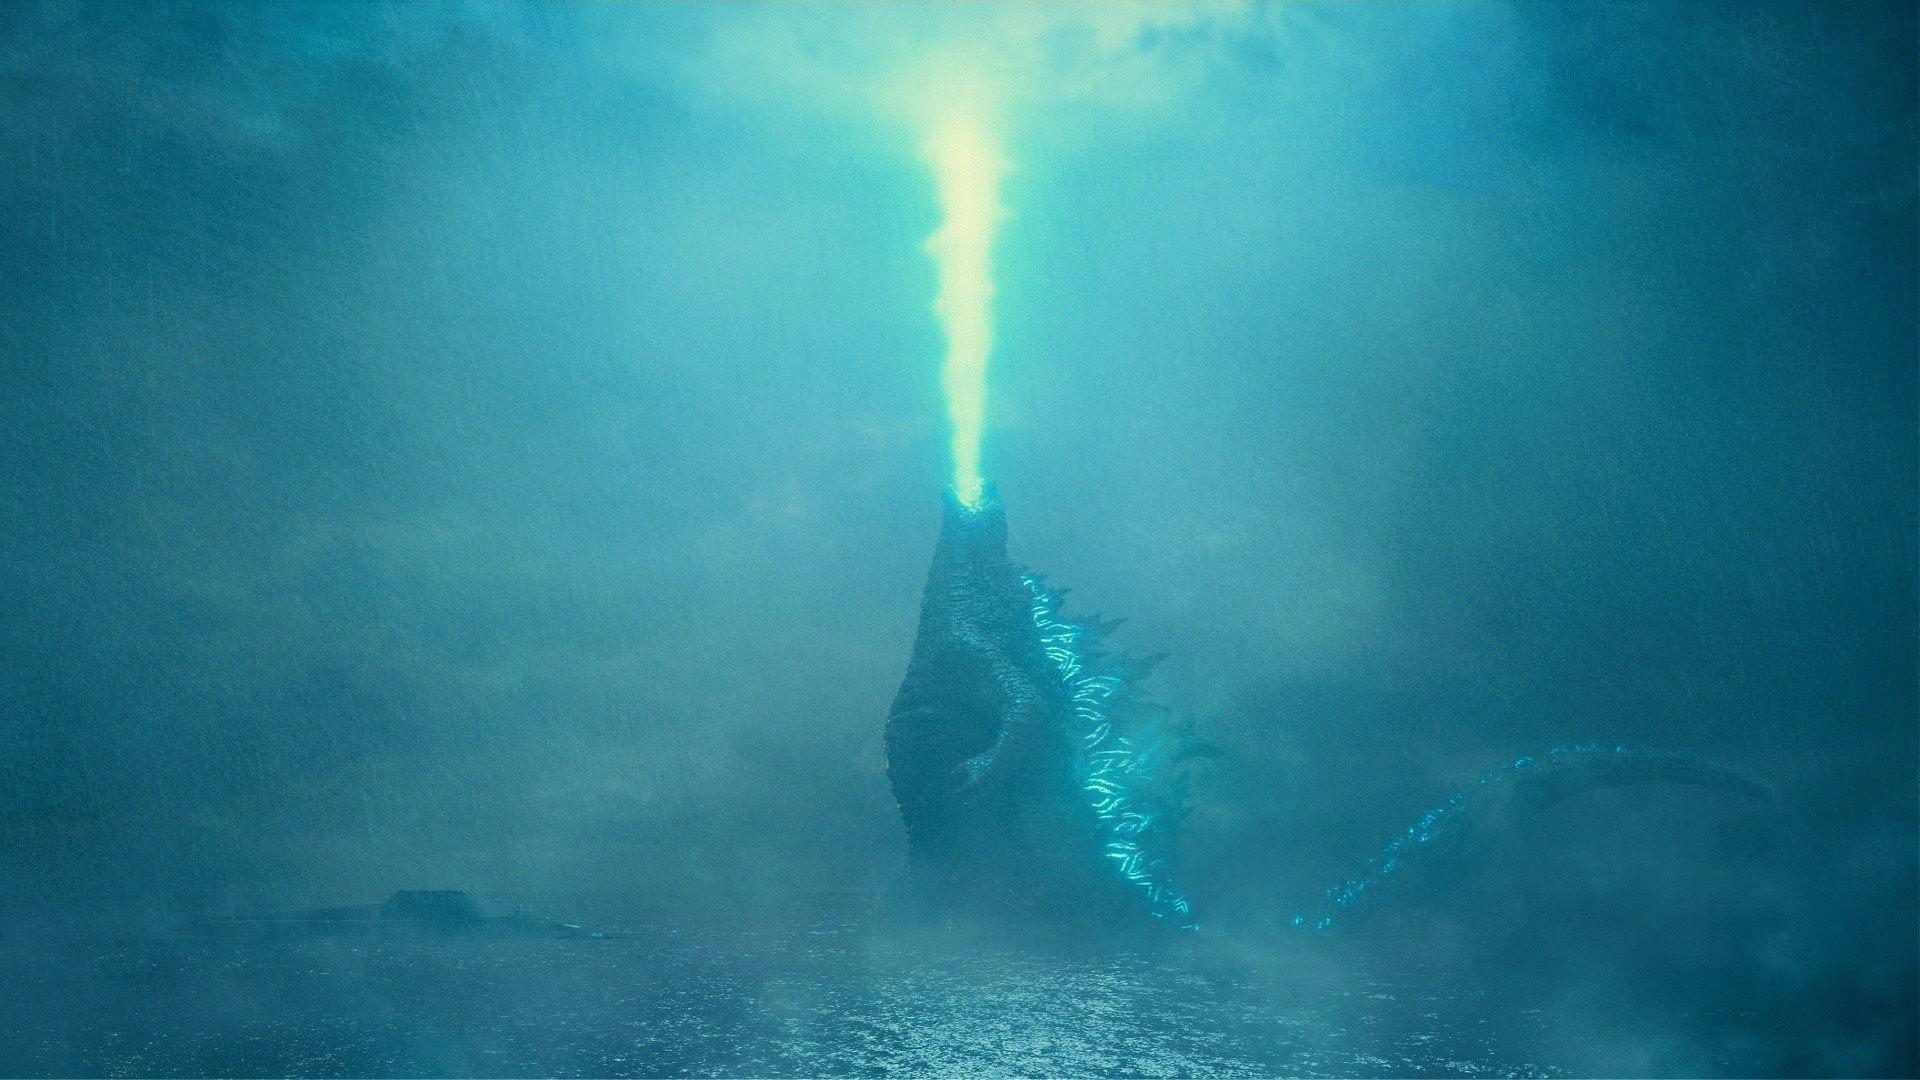 10. Godzilla: King of the Monsters